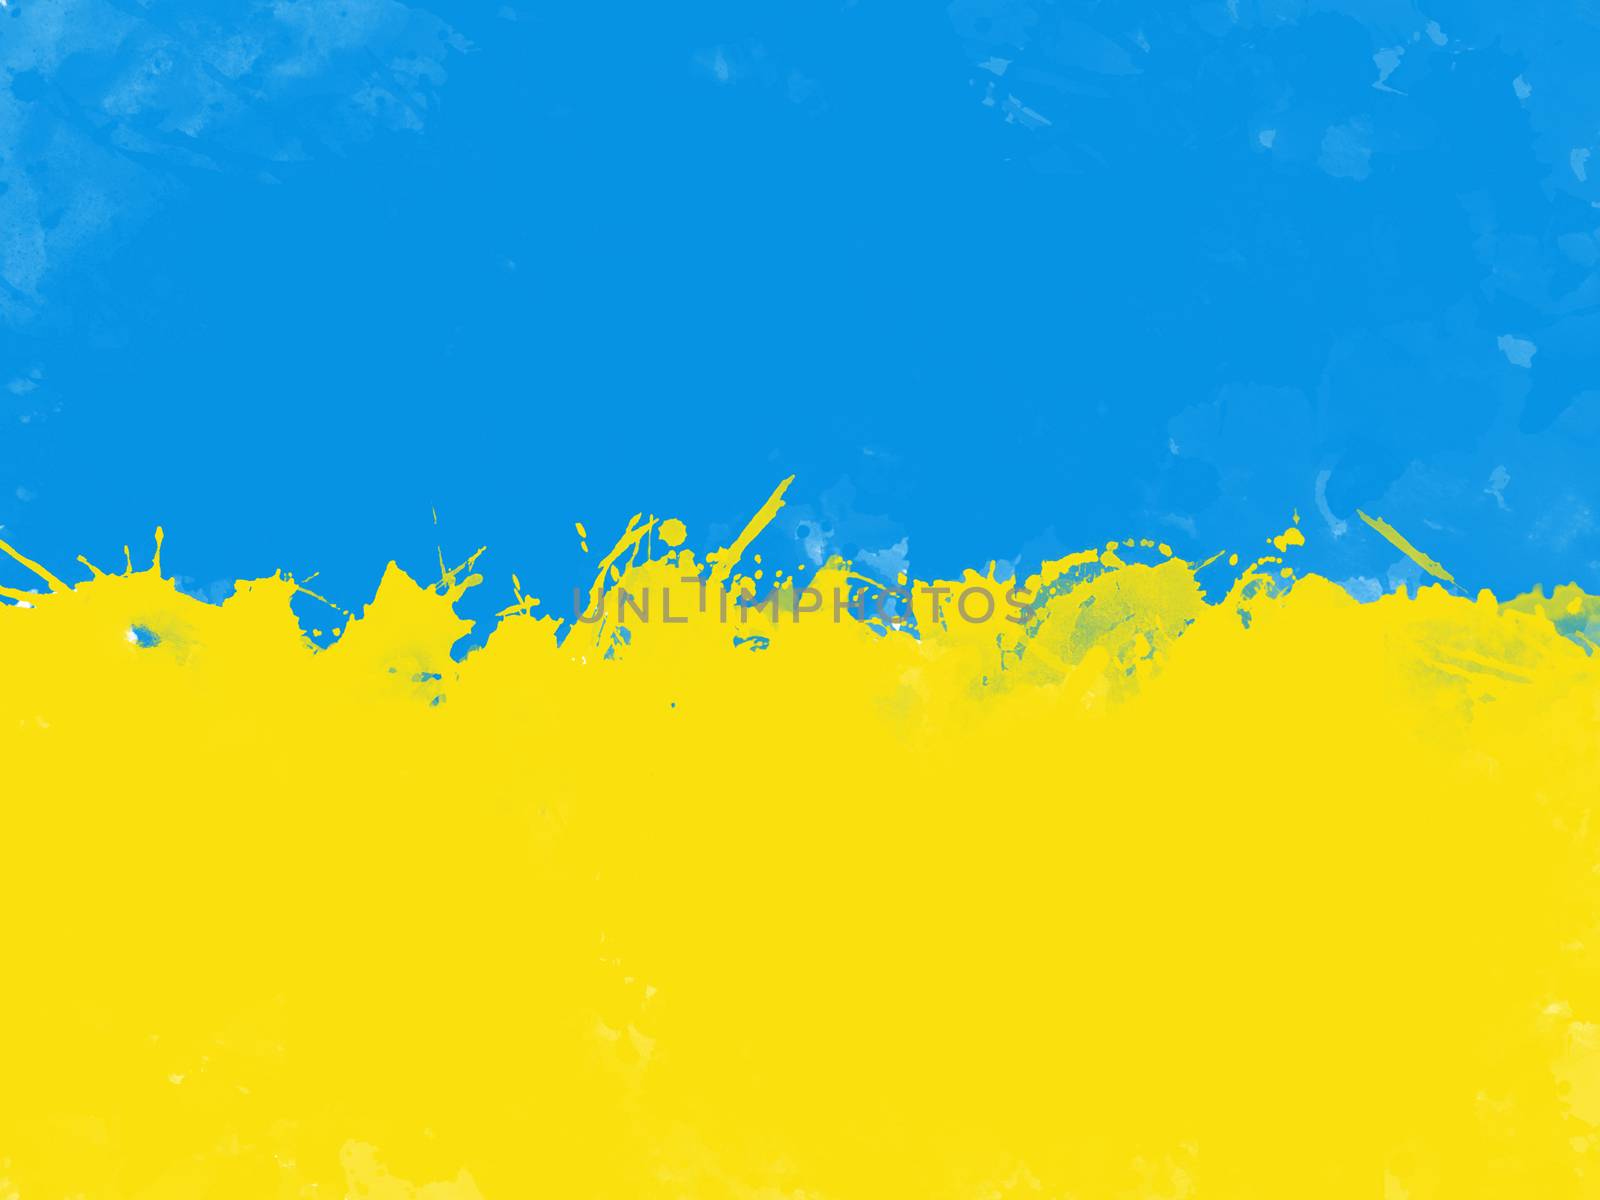 Flag of Ukraine by watercolor paint brush, grunge style by asiandelight